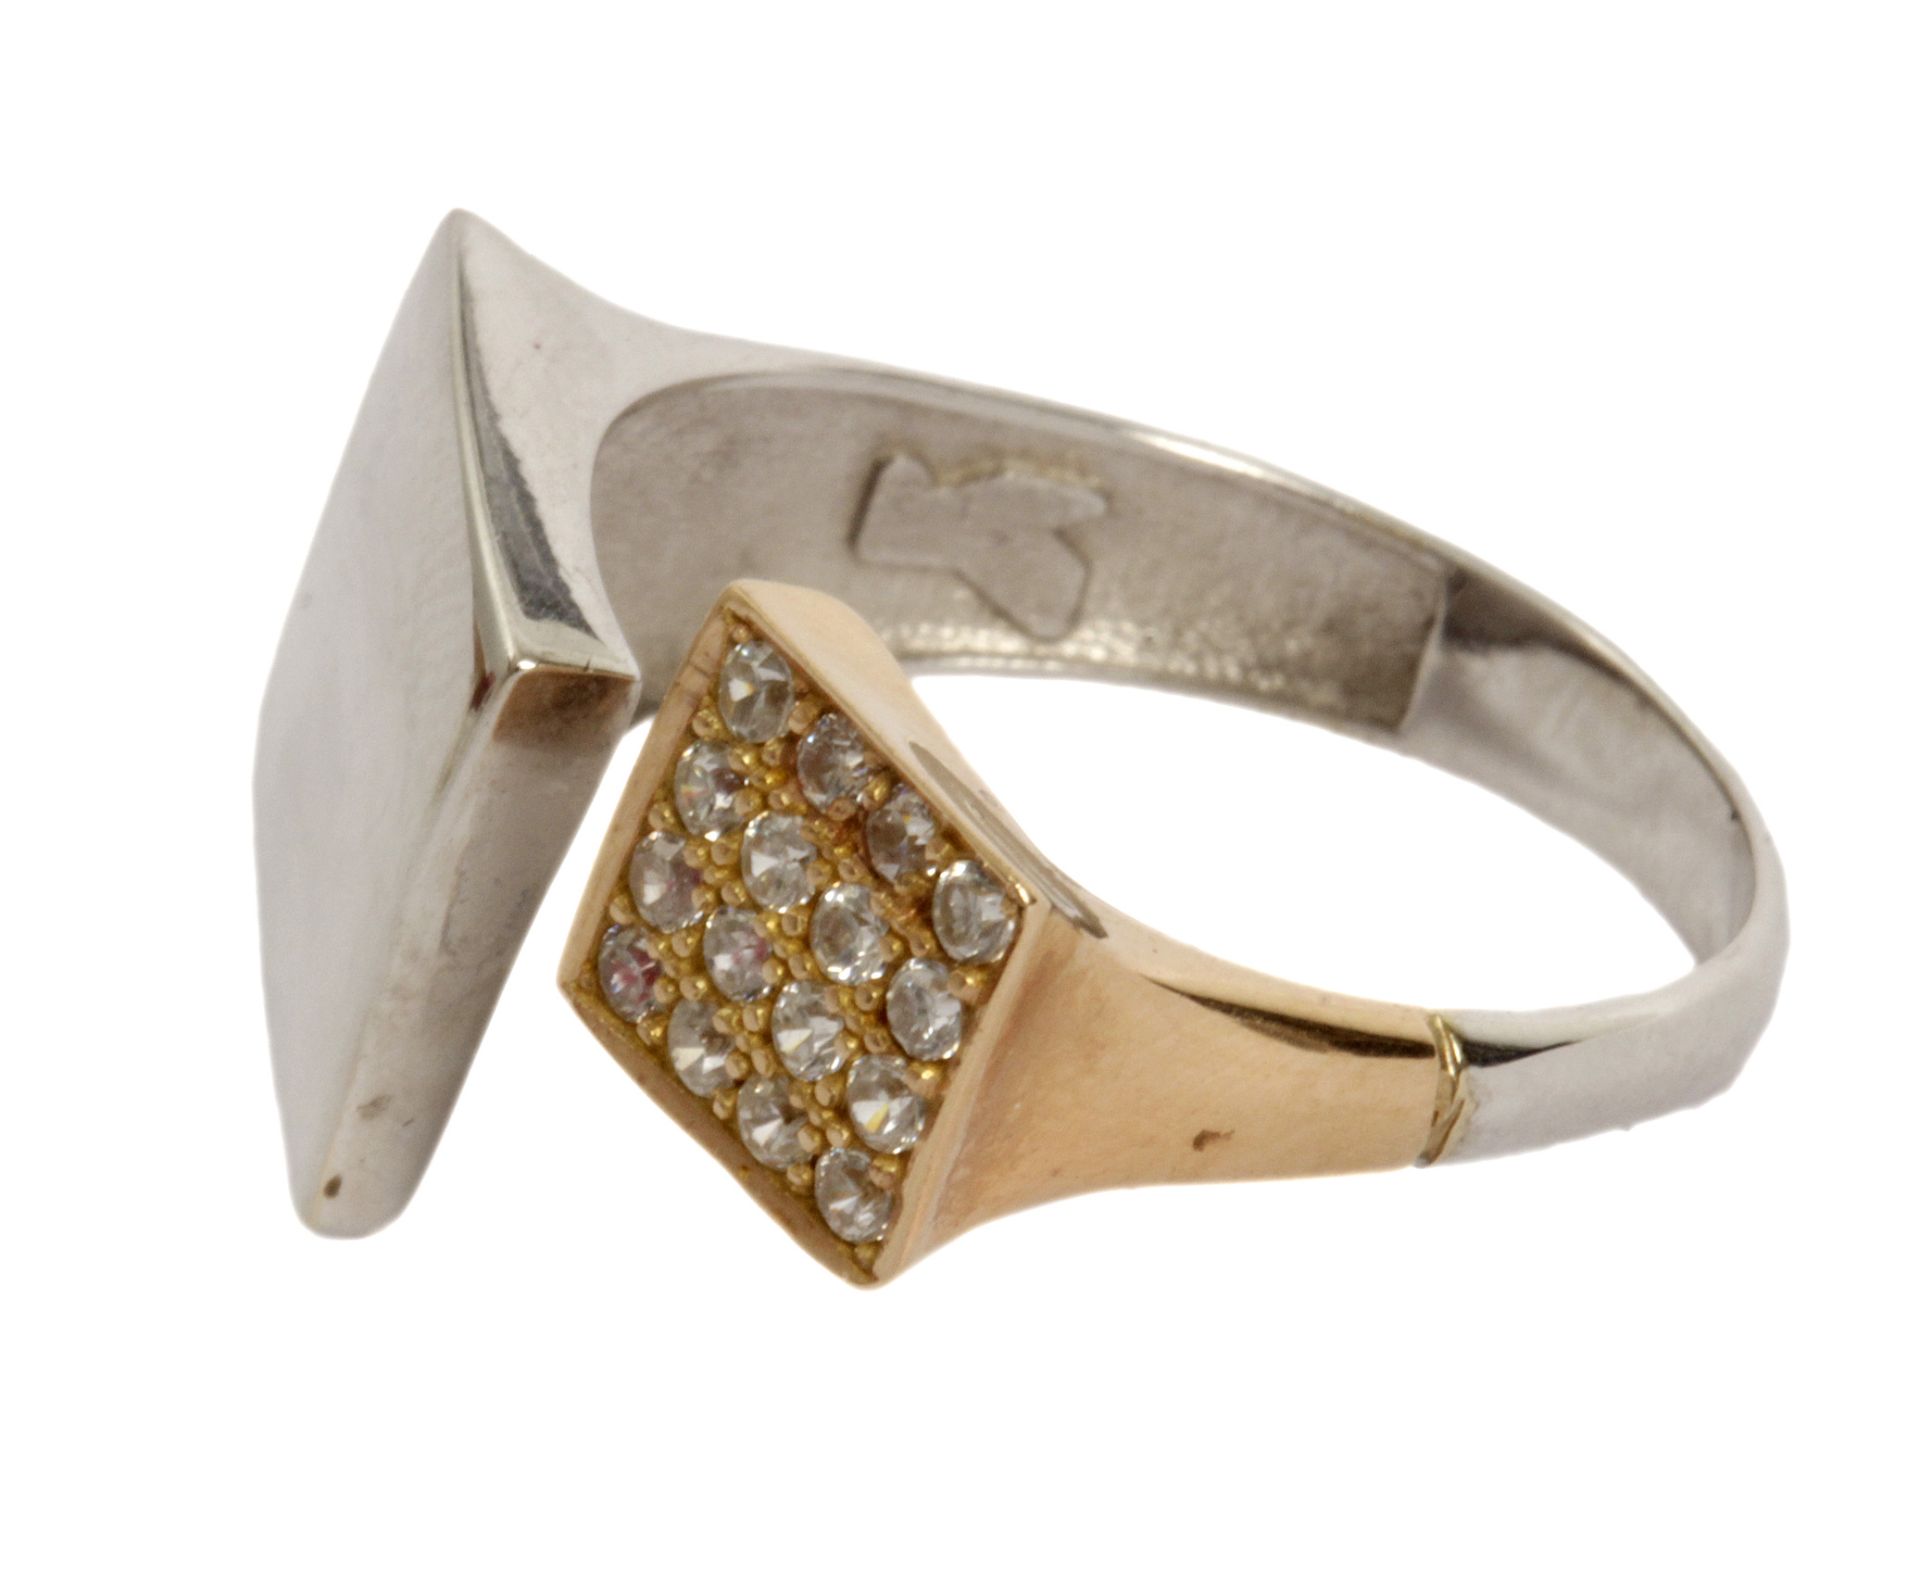 A brilliant cut diamonds ring in a yellow gold setting